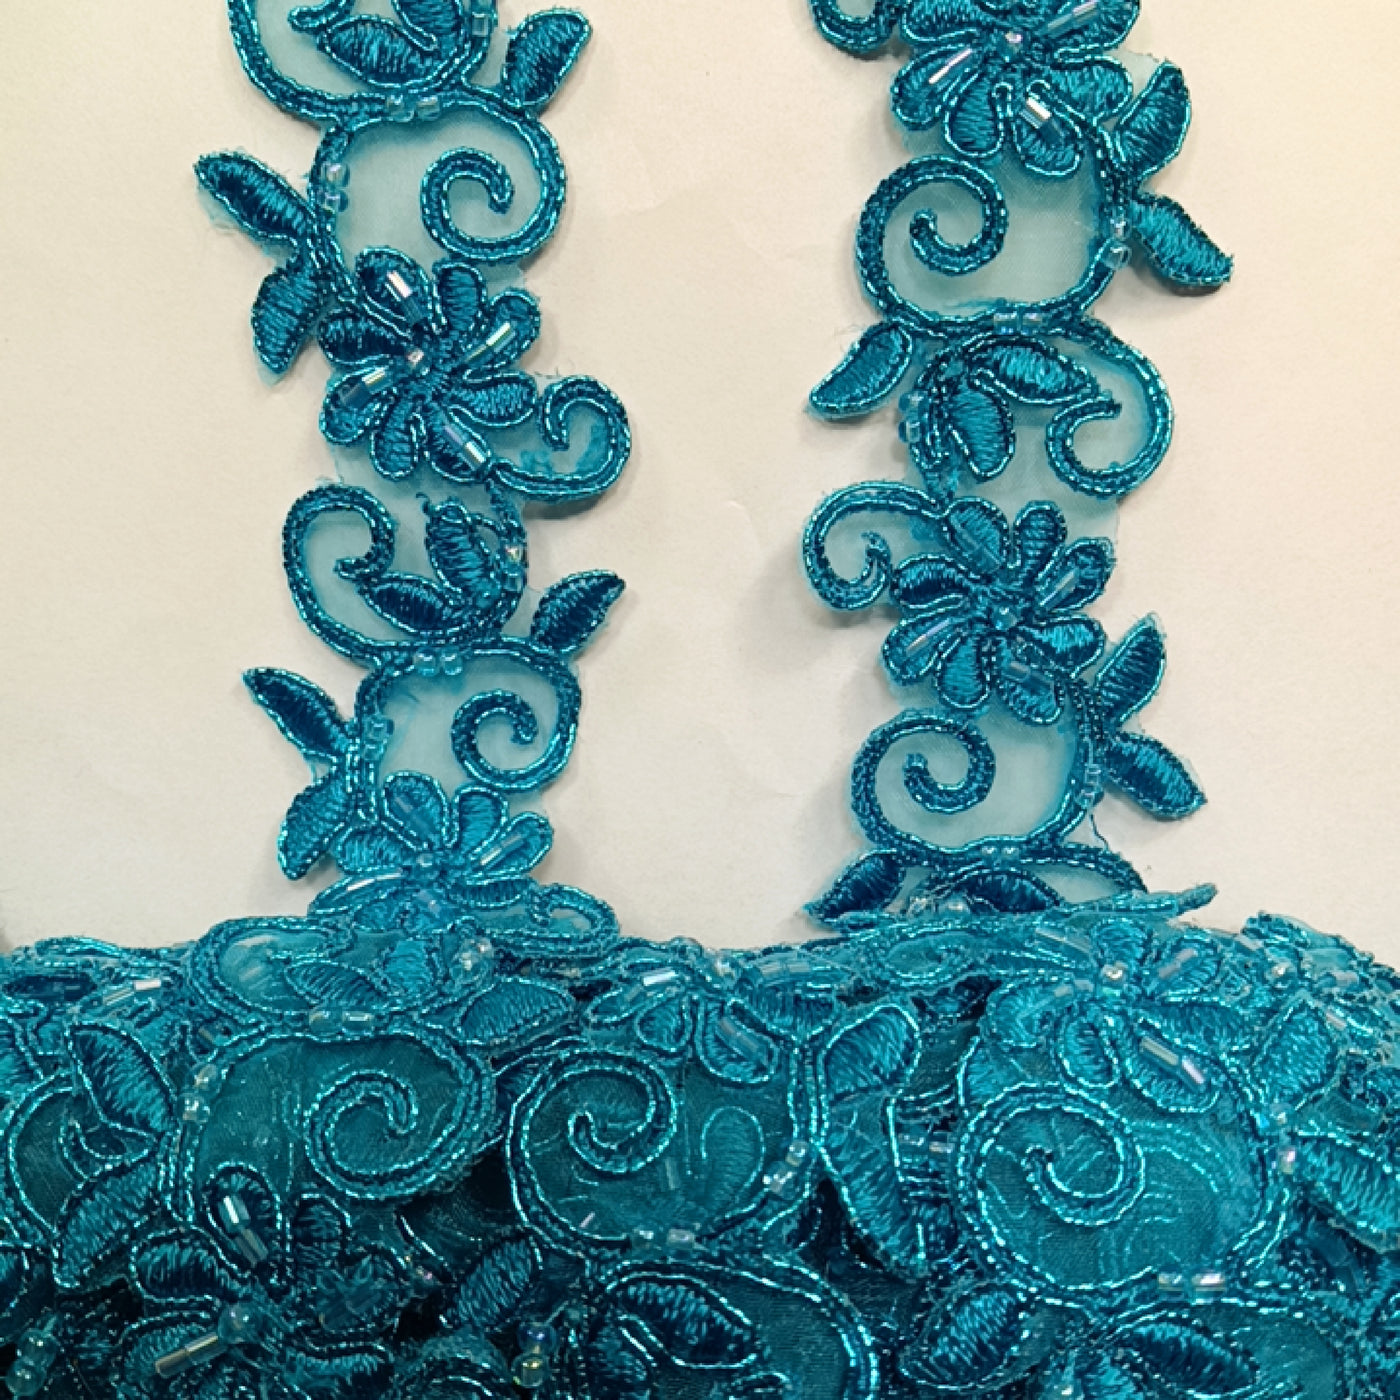 Beaded, Corded & Embroidered Metallic Turquoise Trimming. Lace Usa